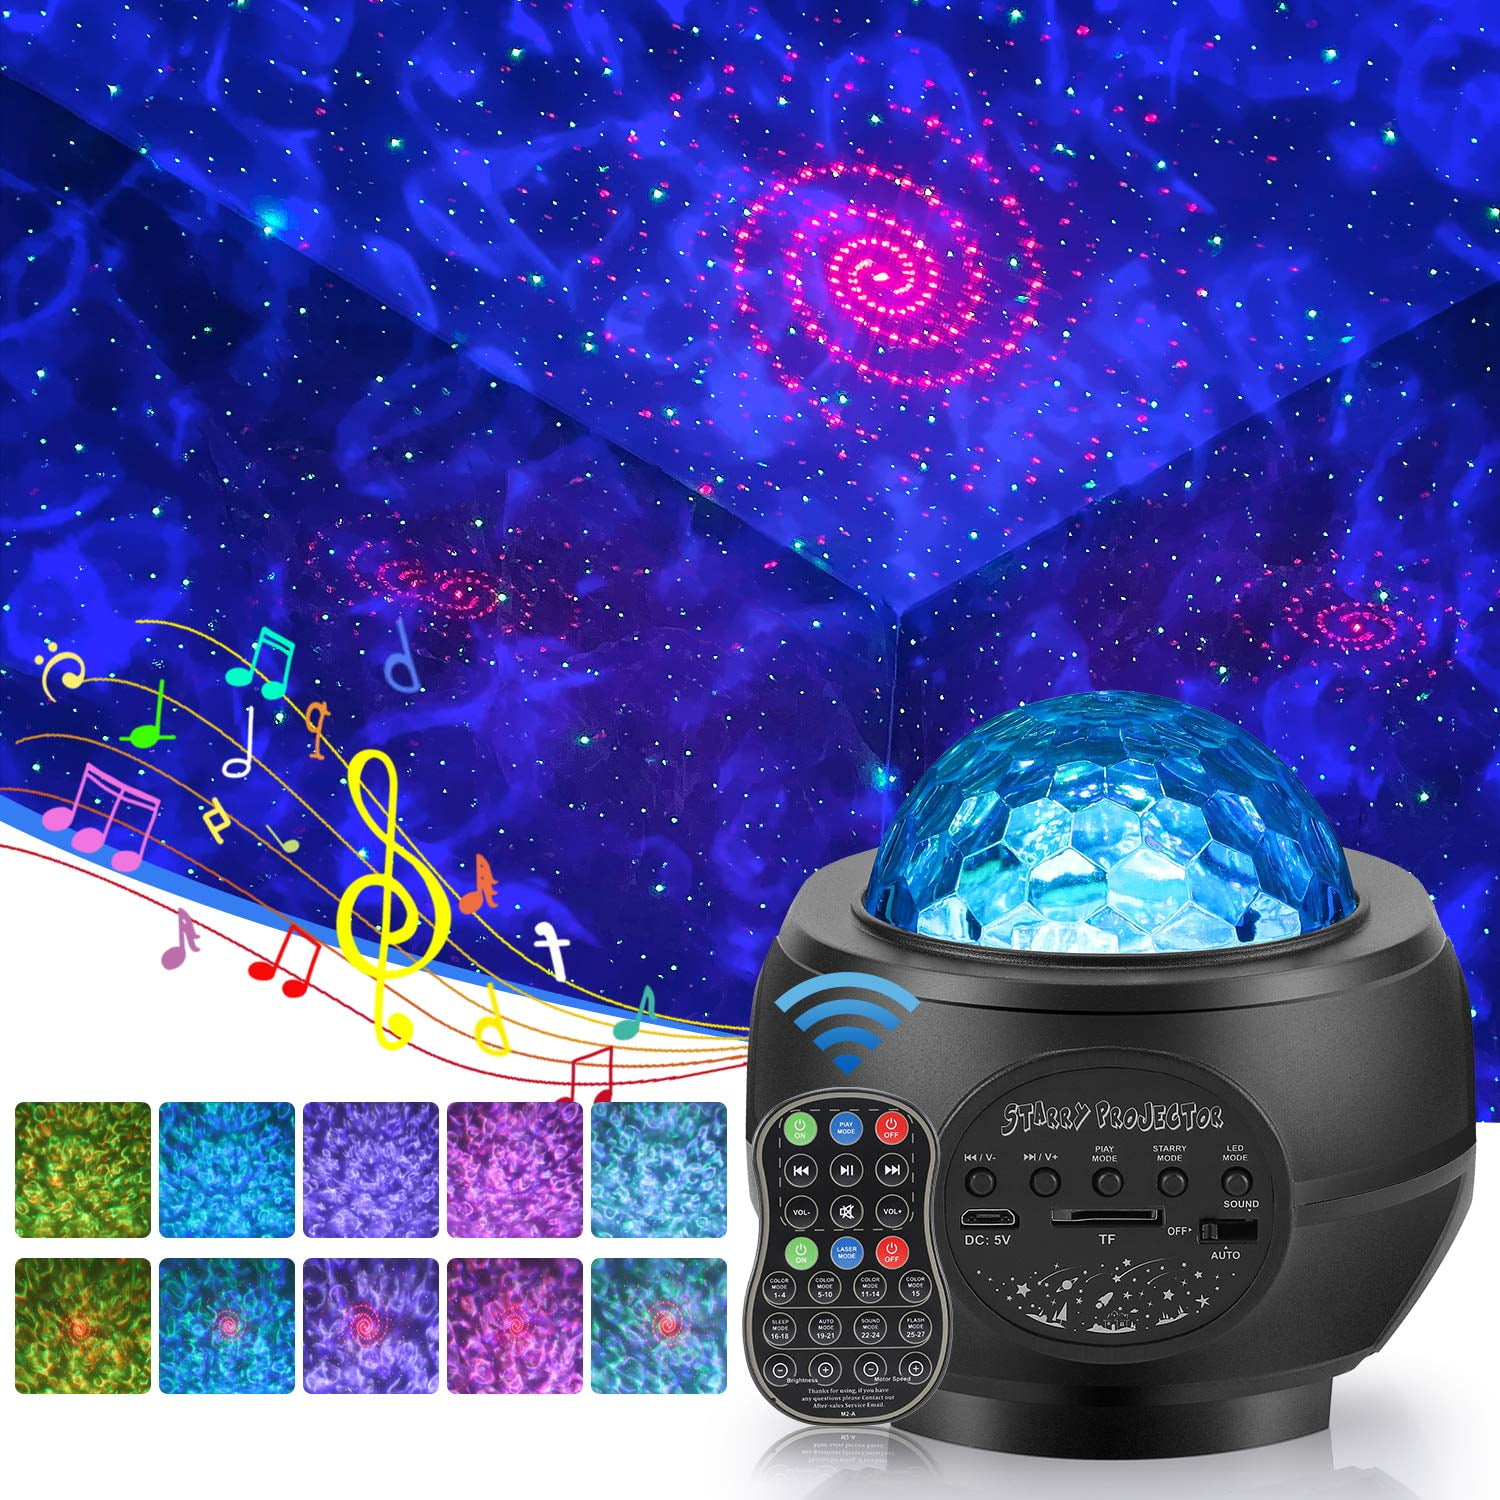 LED Night Light Galaxy Starry Projector Ocean Star Sky Party Baby Room Lamp Gift 